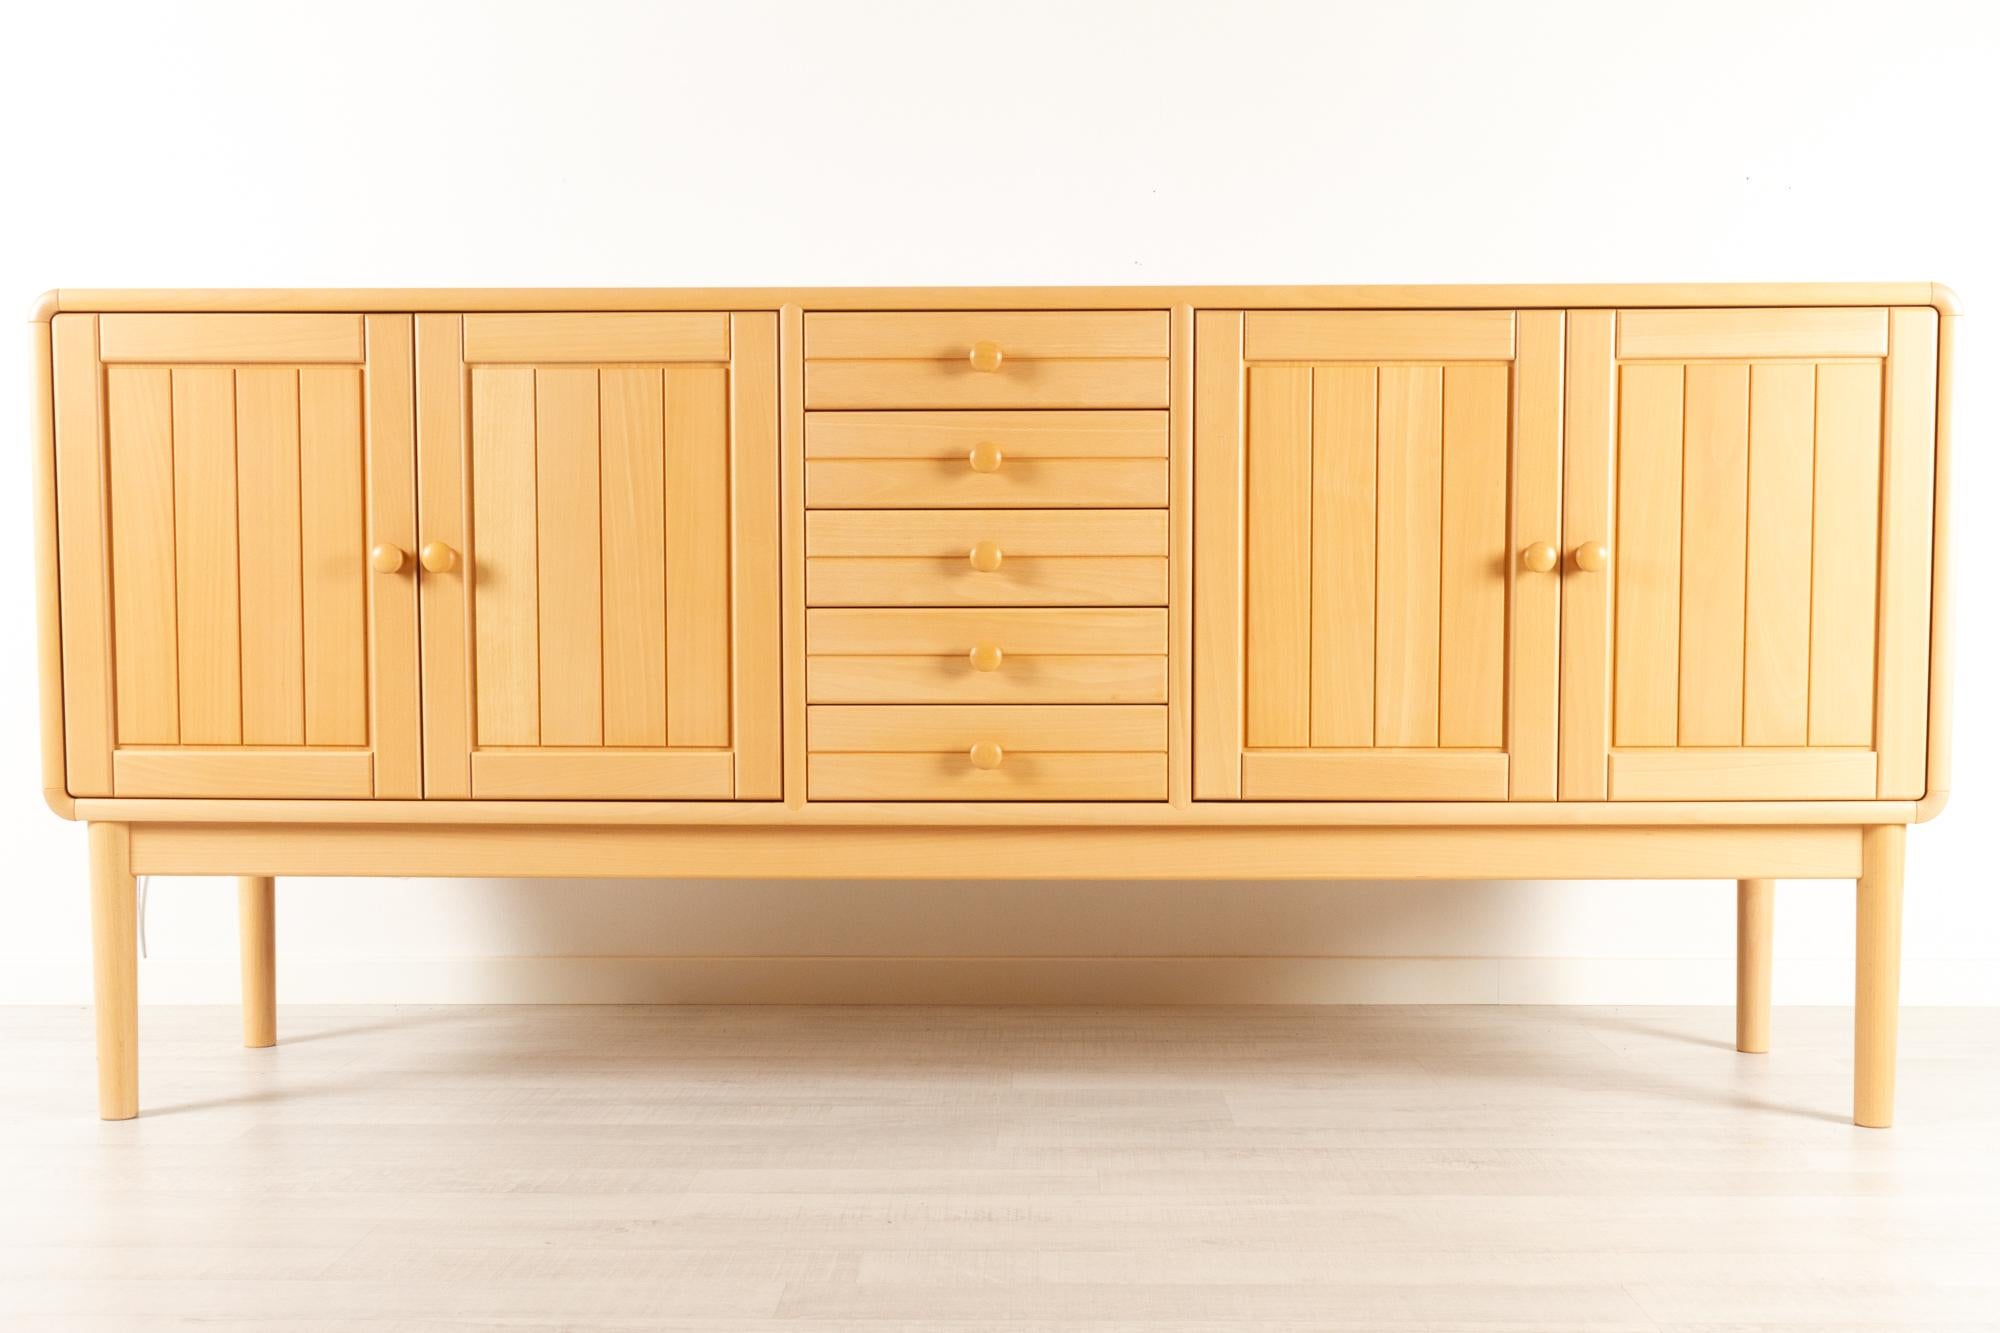 Vintage Danish modern beech sideboard by Falsig Møbelfabrik, 1990s
Long lowboard in the light nordic design. Loads of storage space in the two cabinets and five drawers. The body has rounded corners in light blond solid beech, and the double hinged